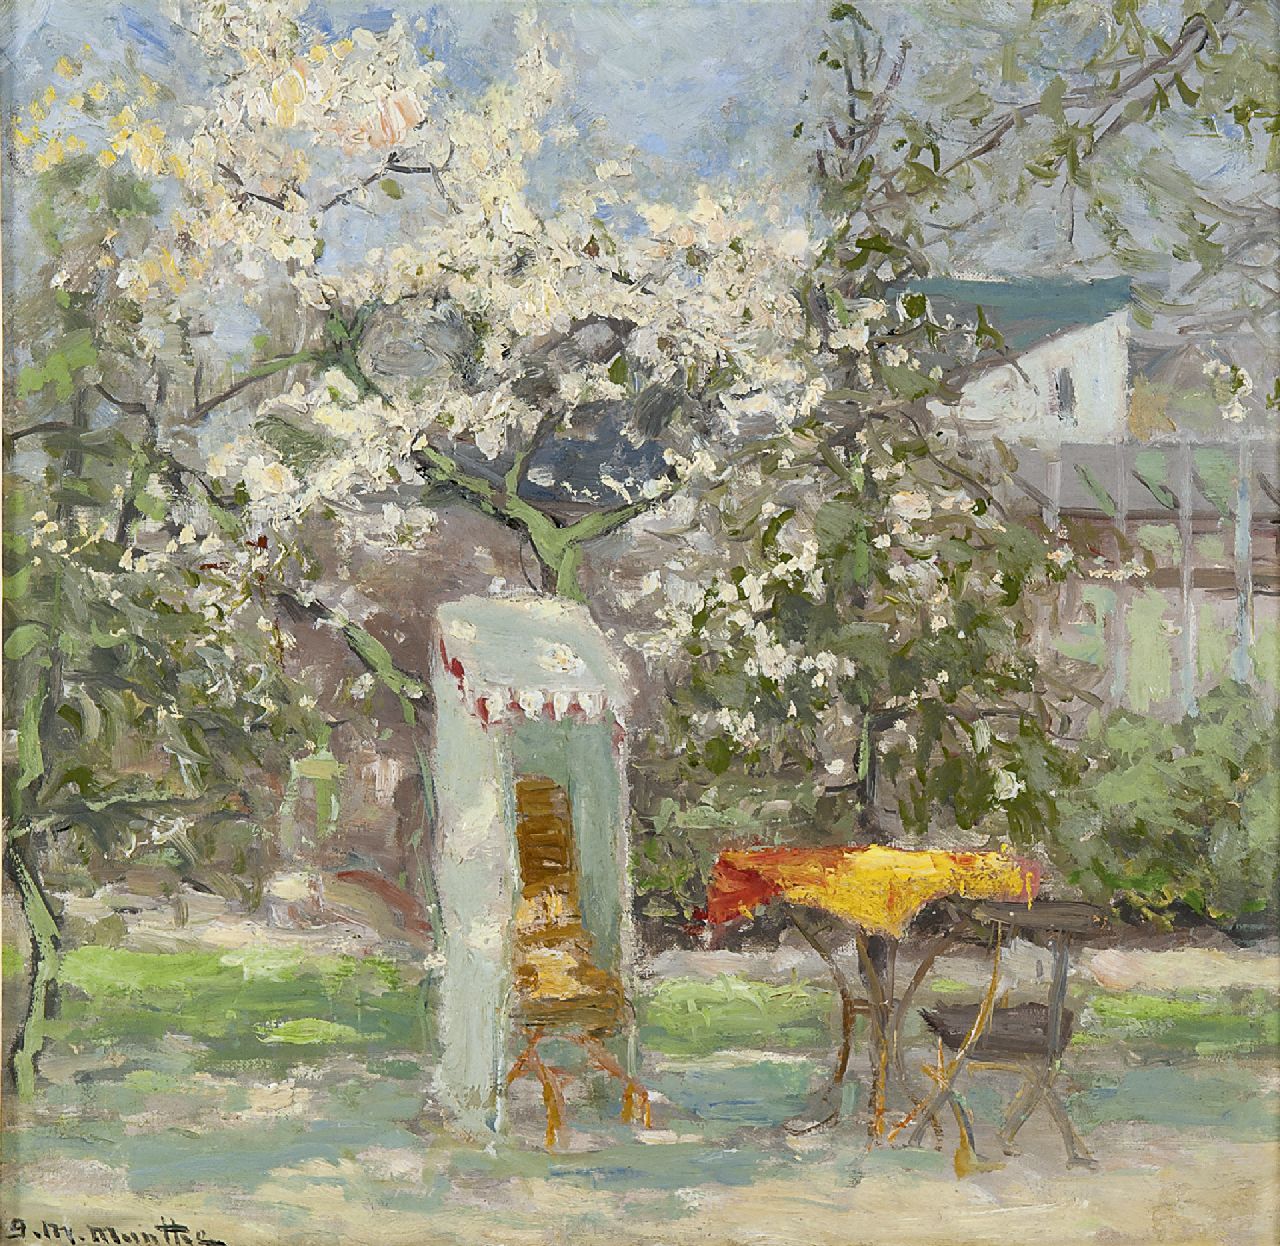 Munthe G.A.L.  | Gerhard Arij Ludwig 'Morgenstjerne' Munthe, Garden with patio under blossoming tree, oil on canvas laid down on board 31.0 x 32.0 cm, signed l.l.